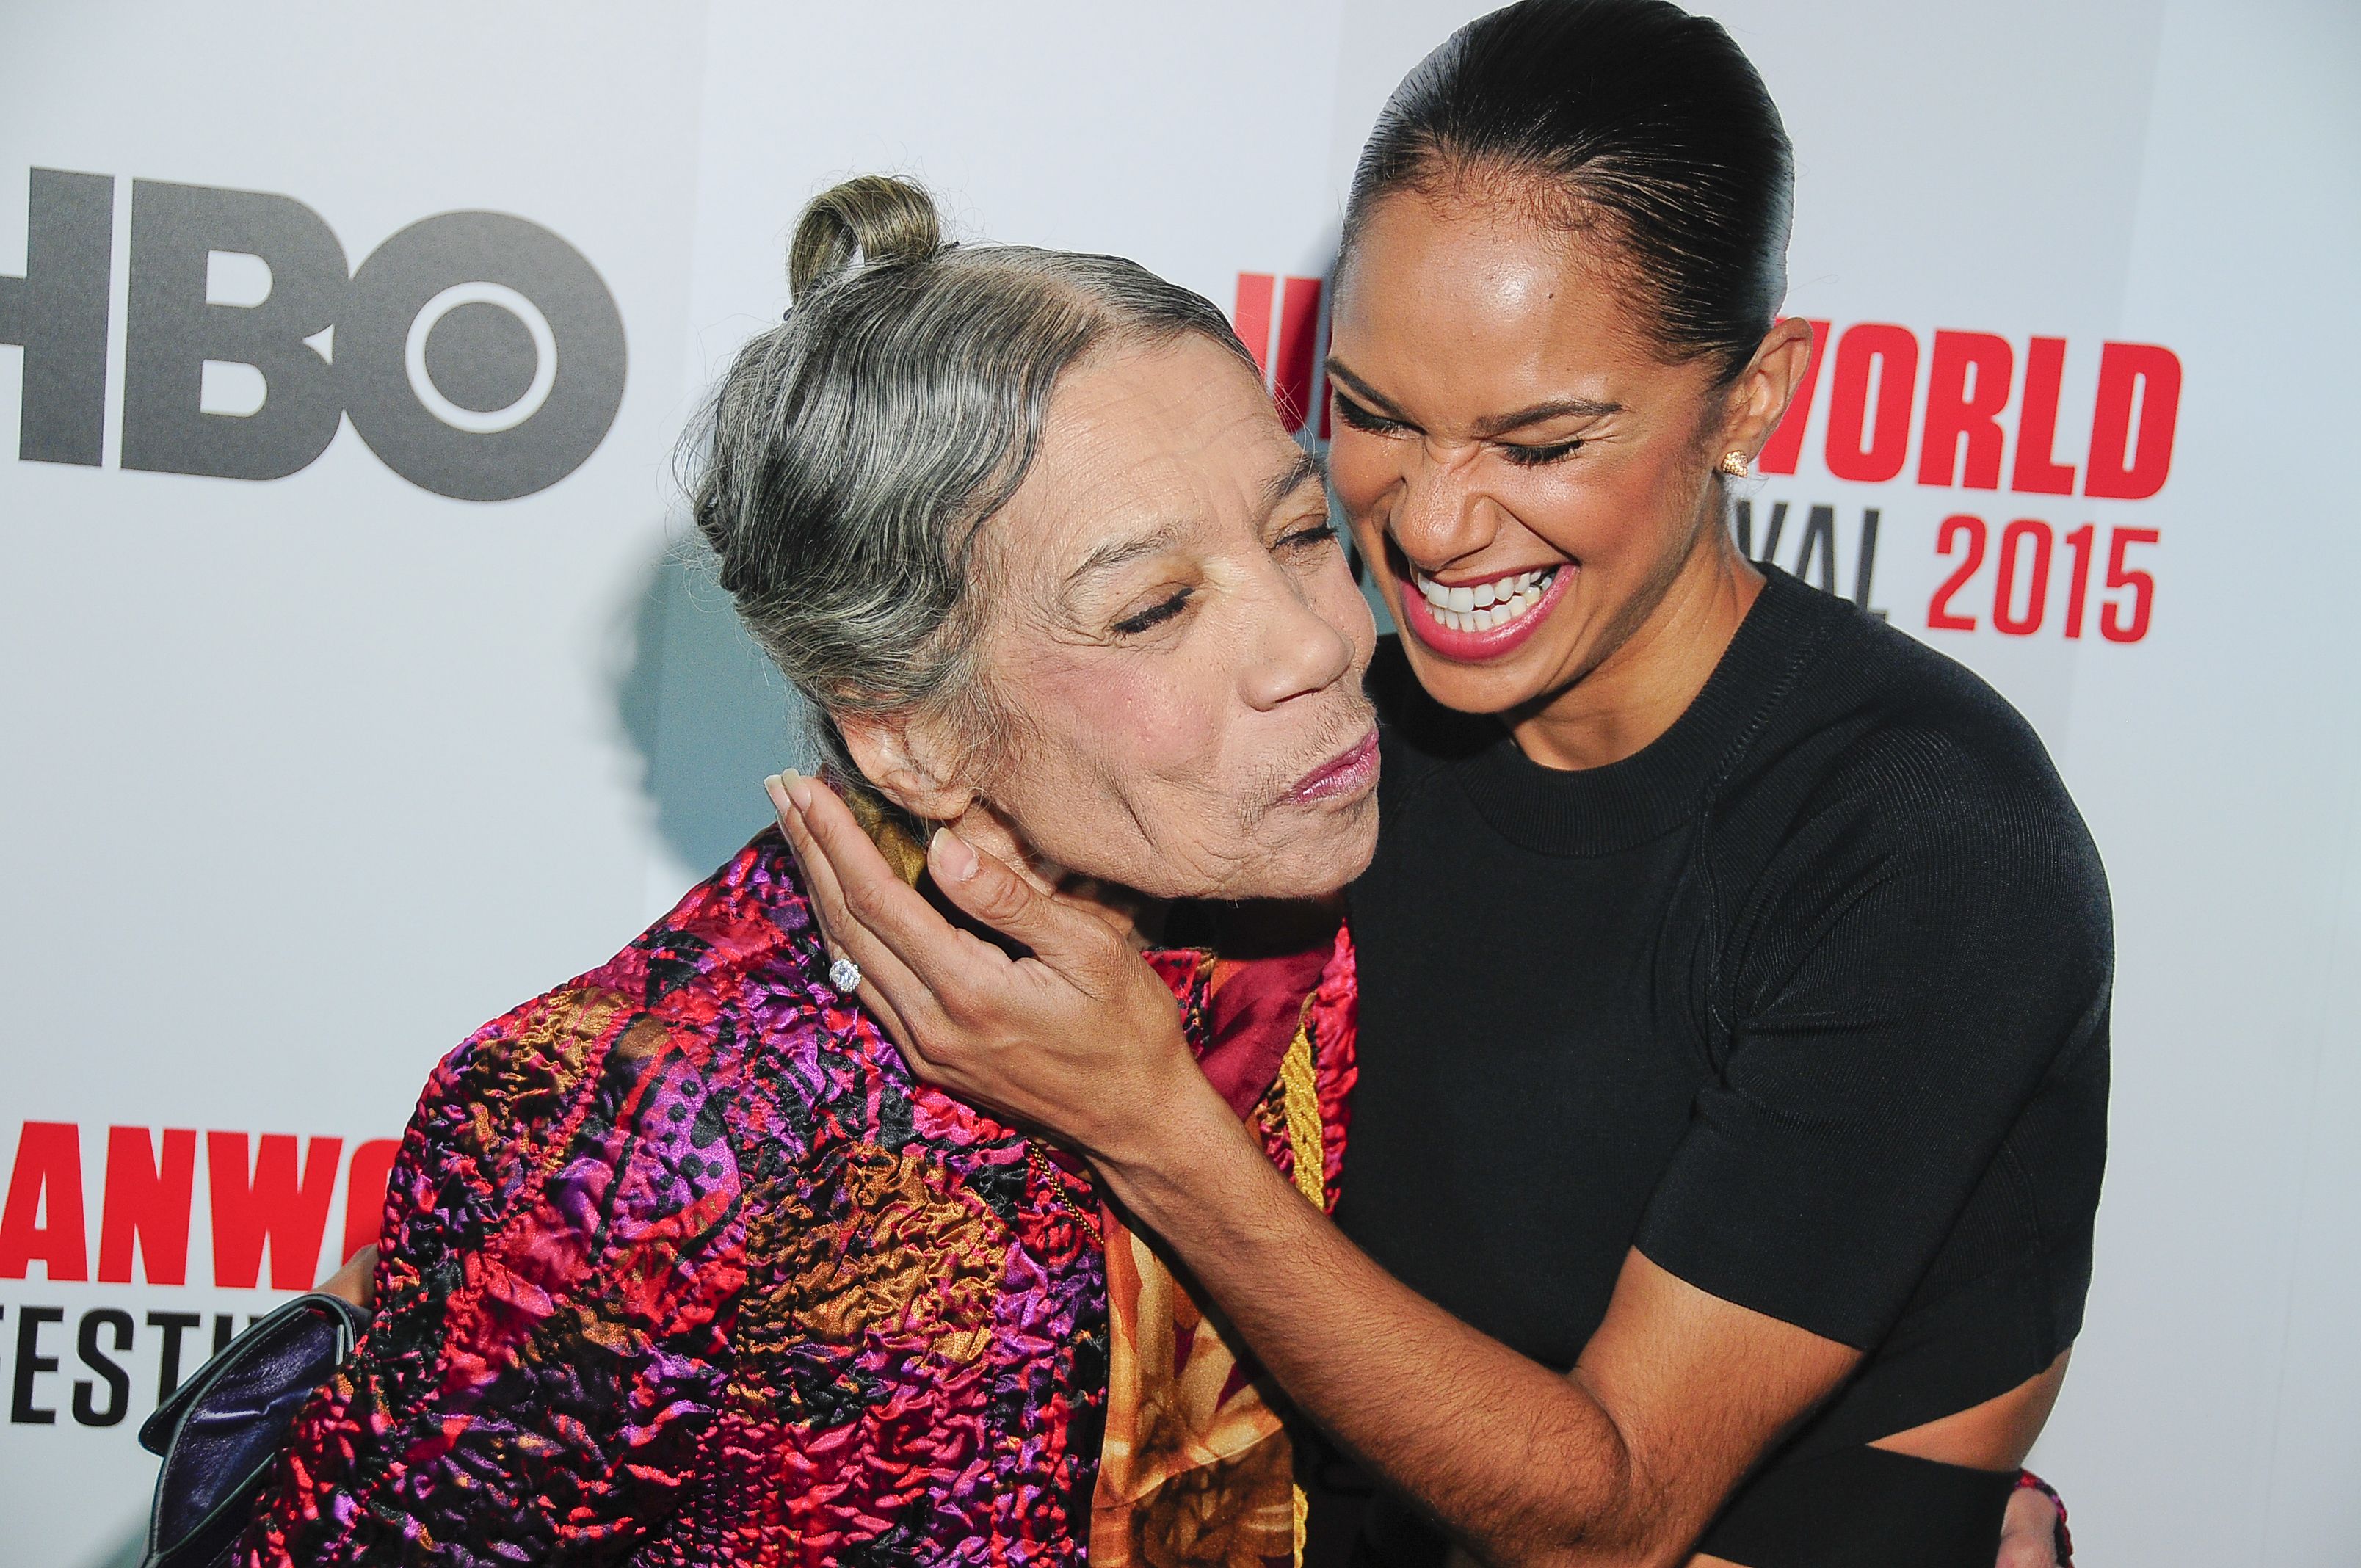 Misty Copeland (right) and Raven Wilkinson at the Urban World Film Festival in New York, NY, on Sep. 27 2015. (MediaPunch/REX/Shutterstock)